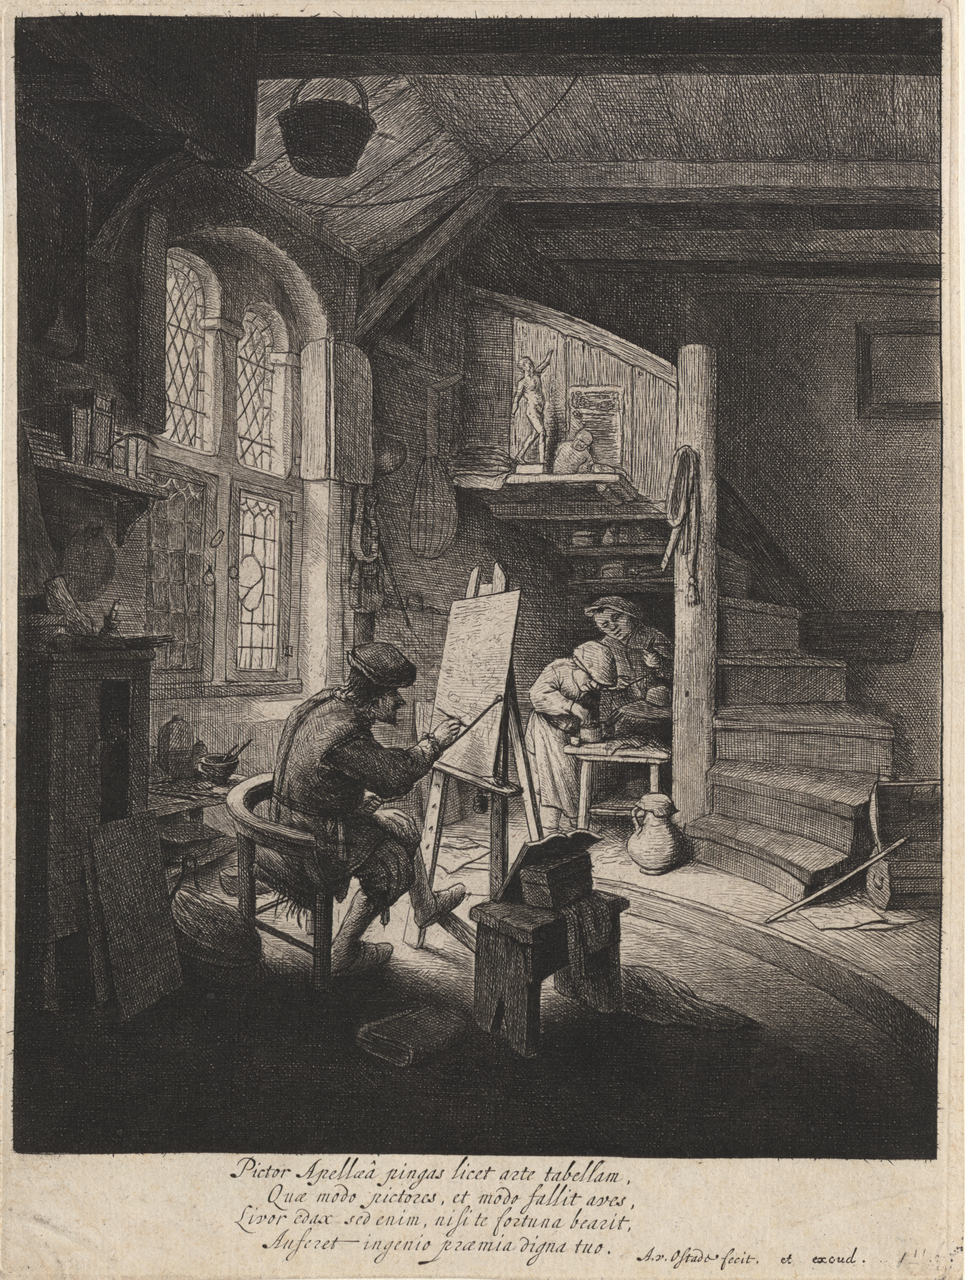 Ostade, Adriaen Van (Etcher, 1610-85) The Painter (c.1647) etching and drypoint plate 23.4 x 17.4 1979.2050.000.000 Baillieu Library Collection, the University of Melbourne.